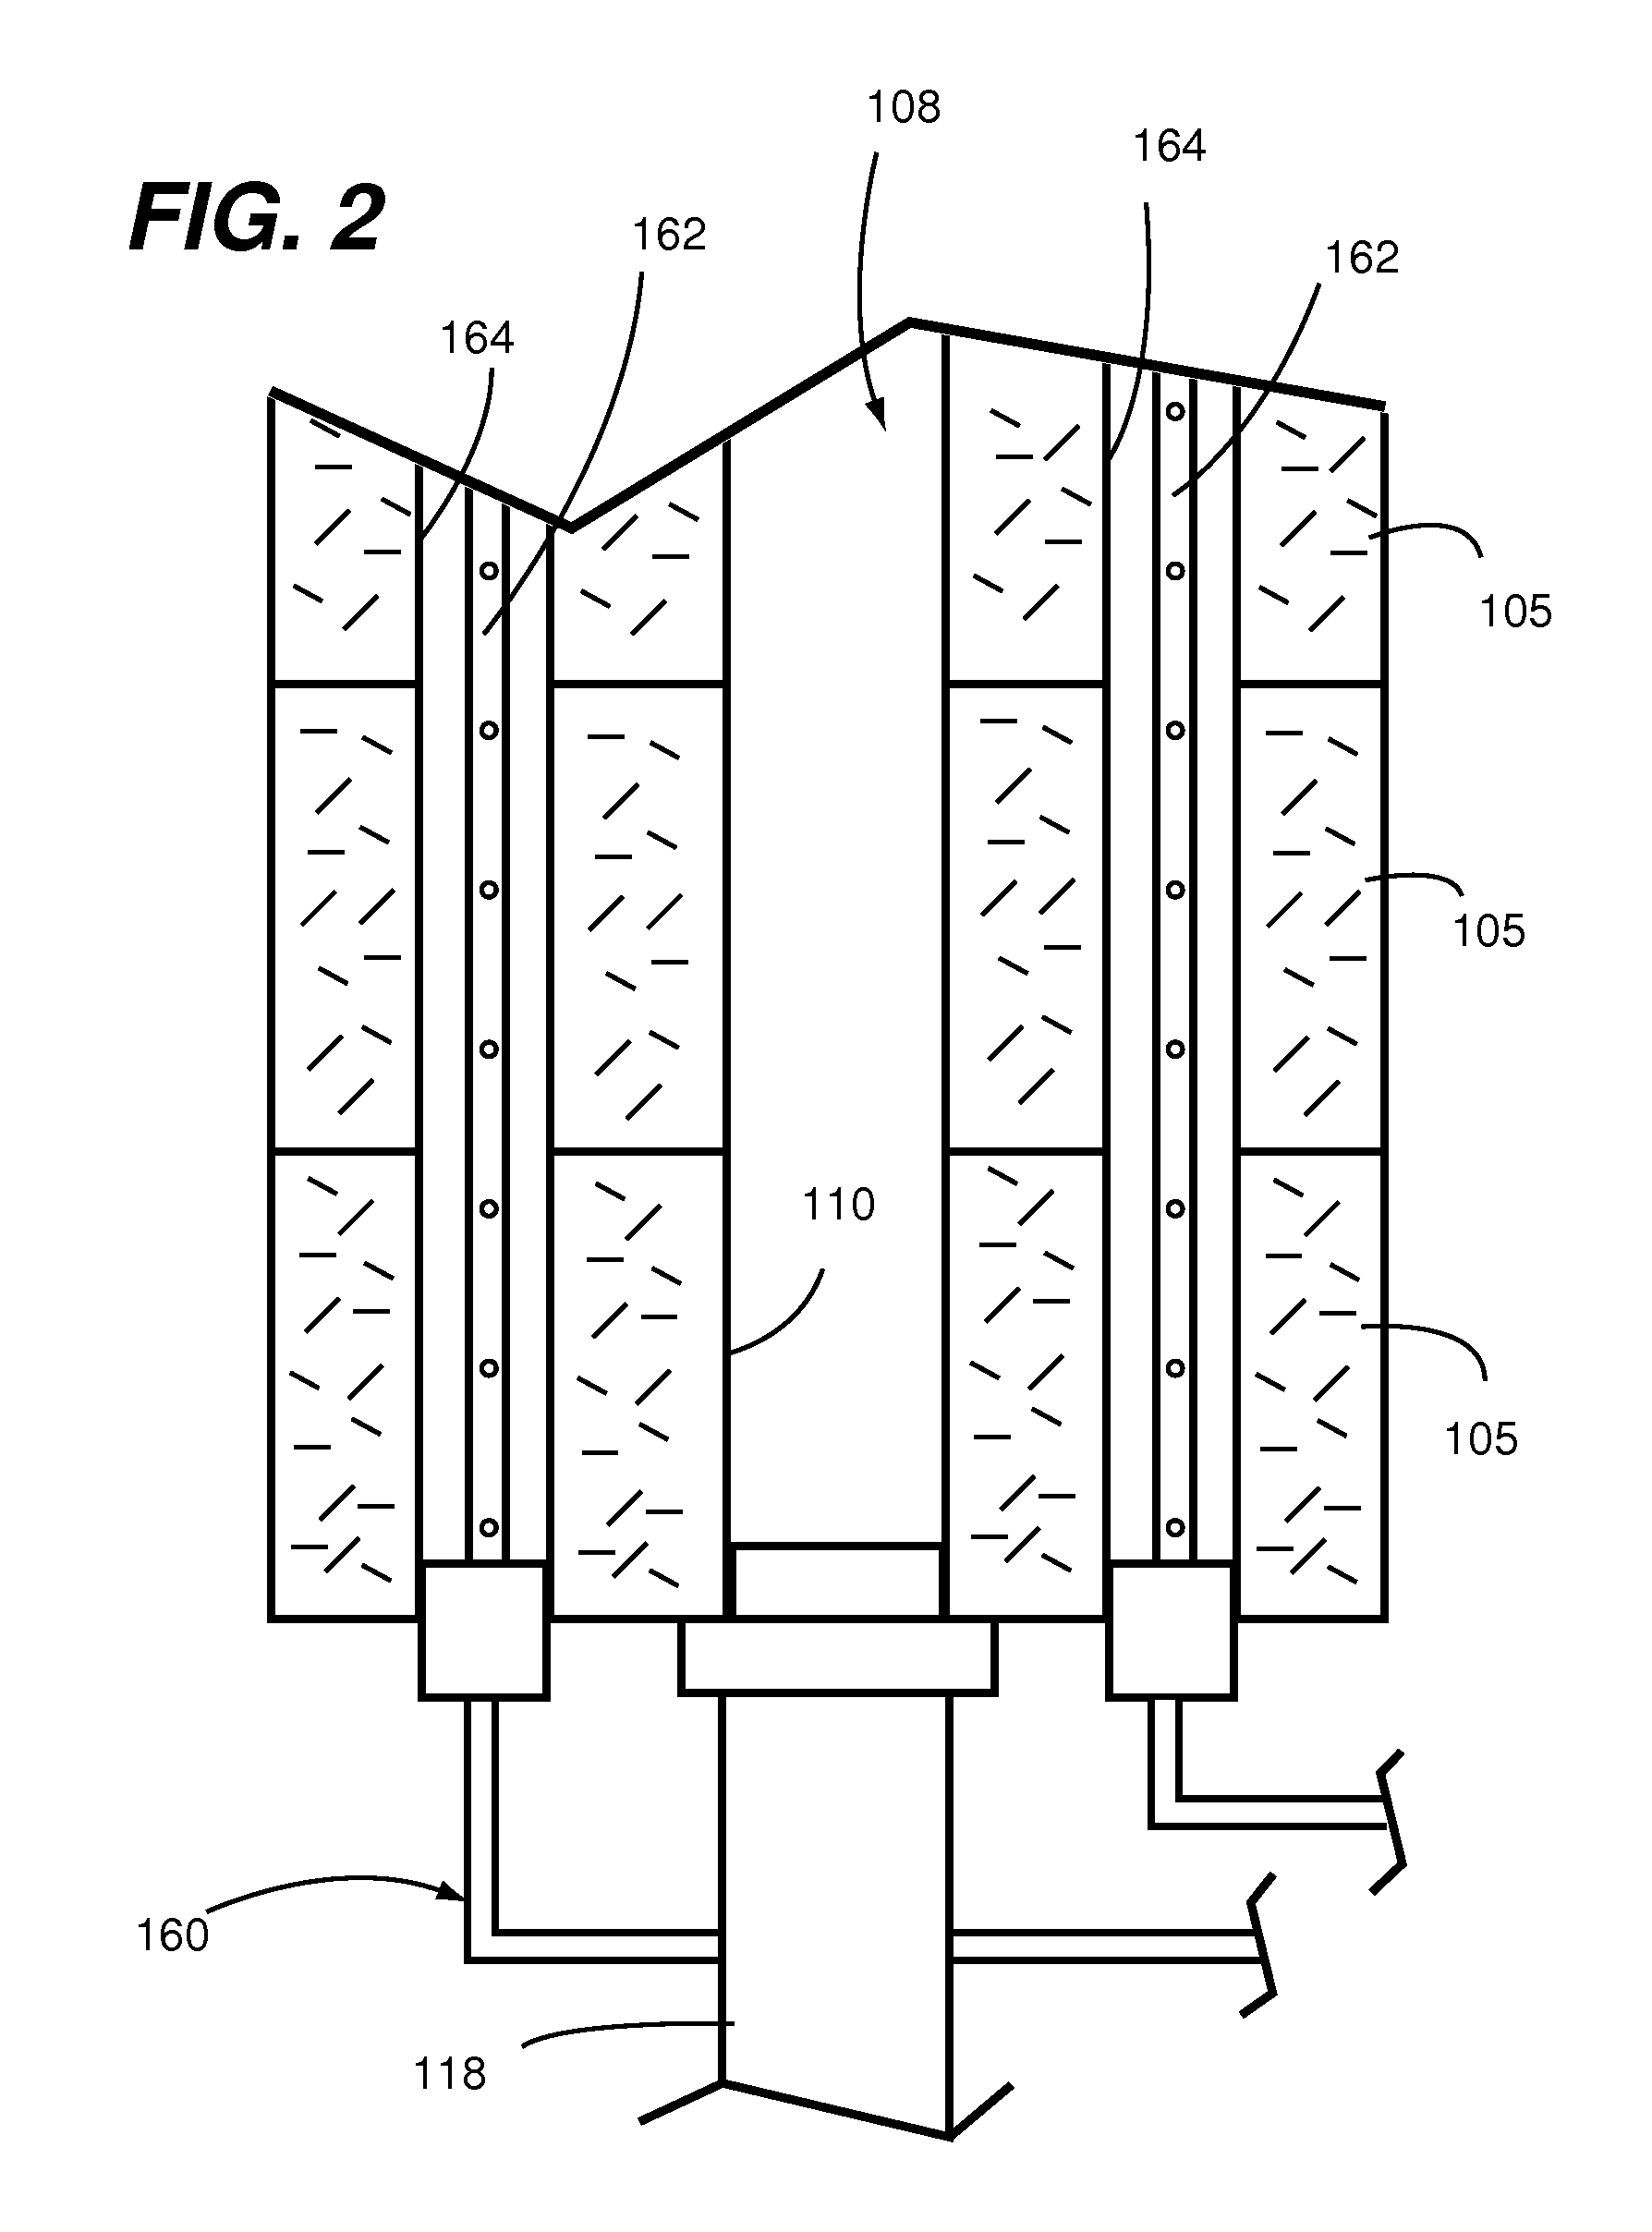 Method and apparatus for climatic conditioning of space within a building structure